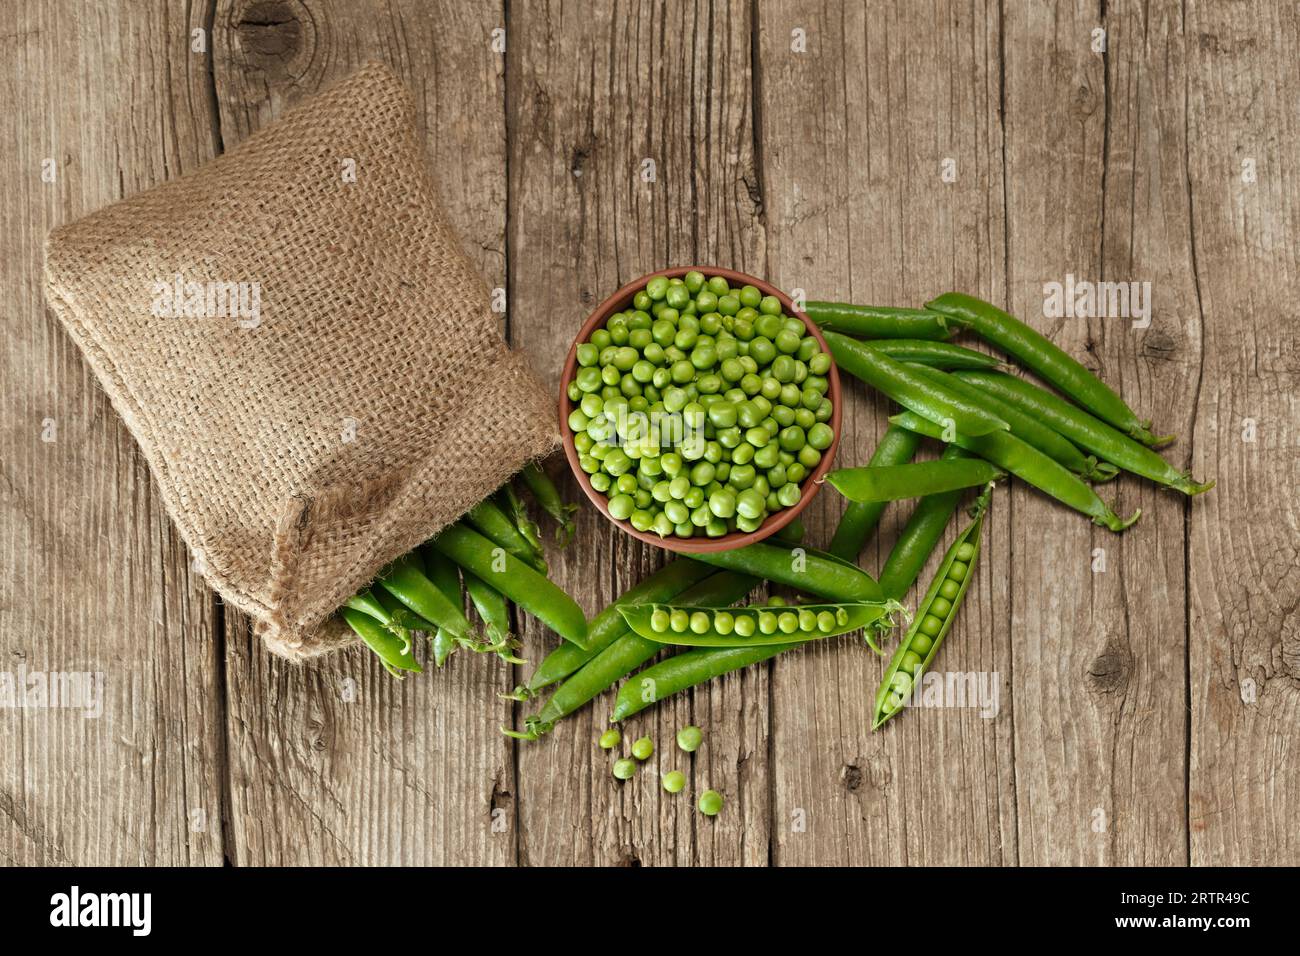 Pods of fresh green peas in a burlap bag, shelled peas in a clay bowl, sweet organic green peas in closed and open pods on an aged wooden background Stock Photo